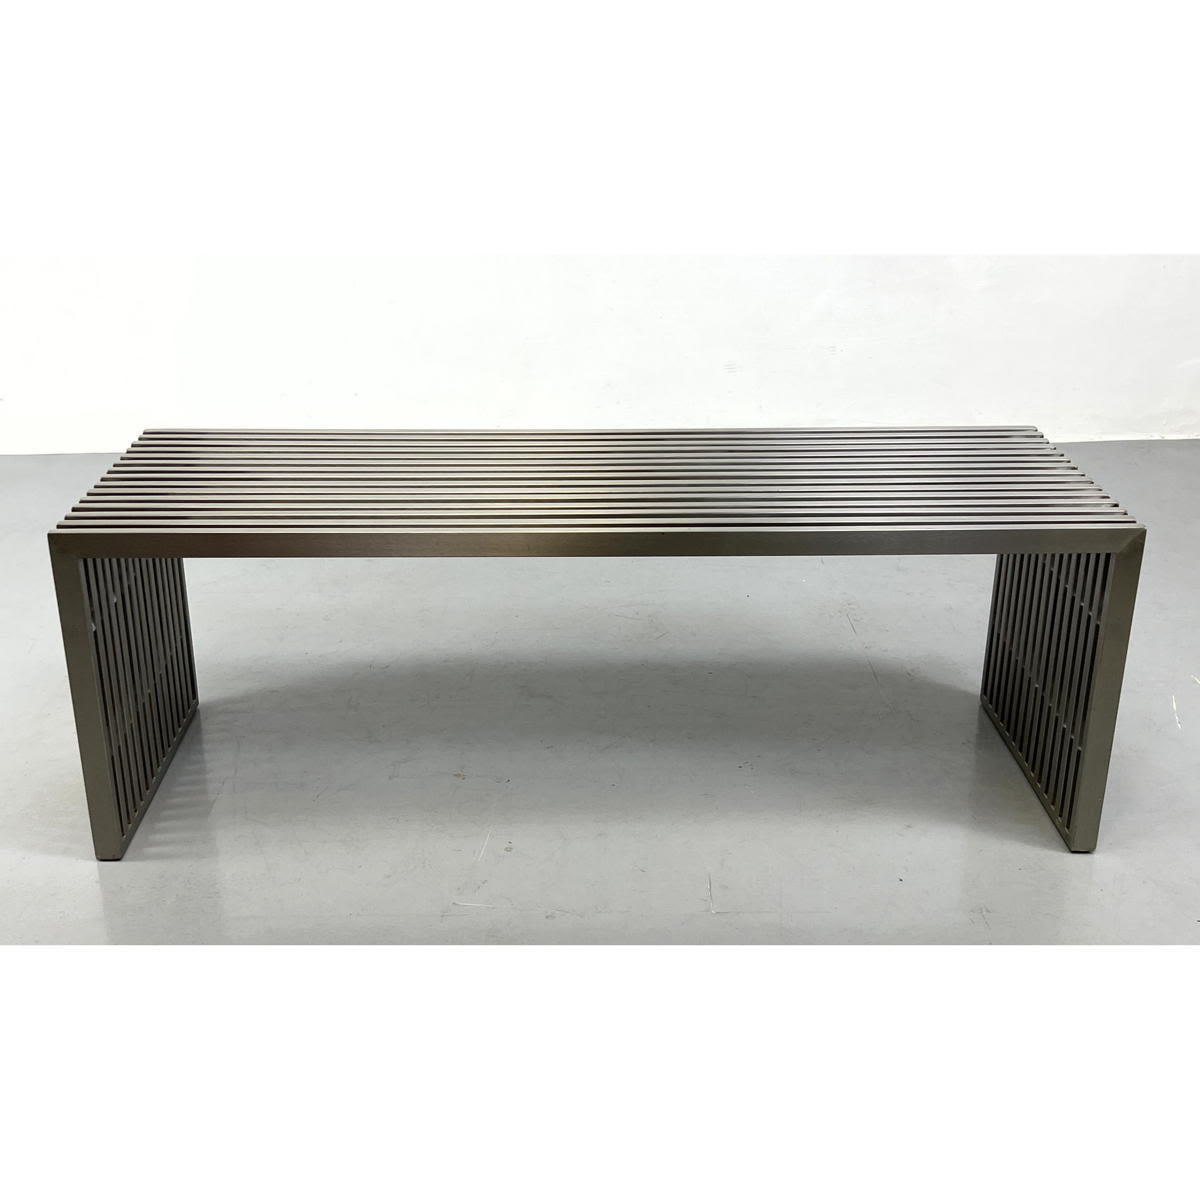 Stainless Slat Bench Coffee Table.